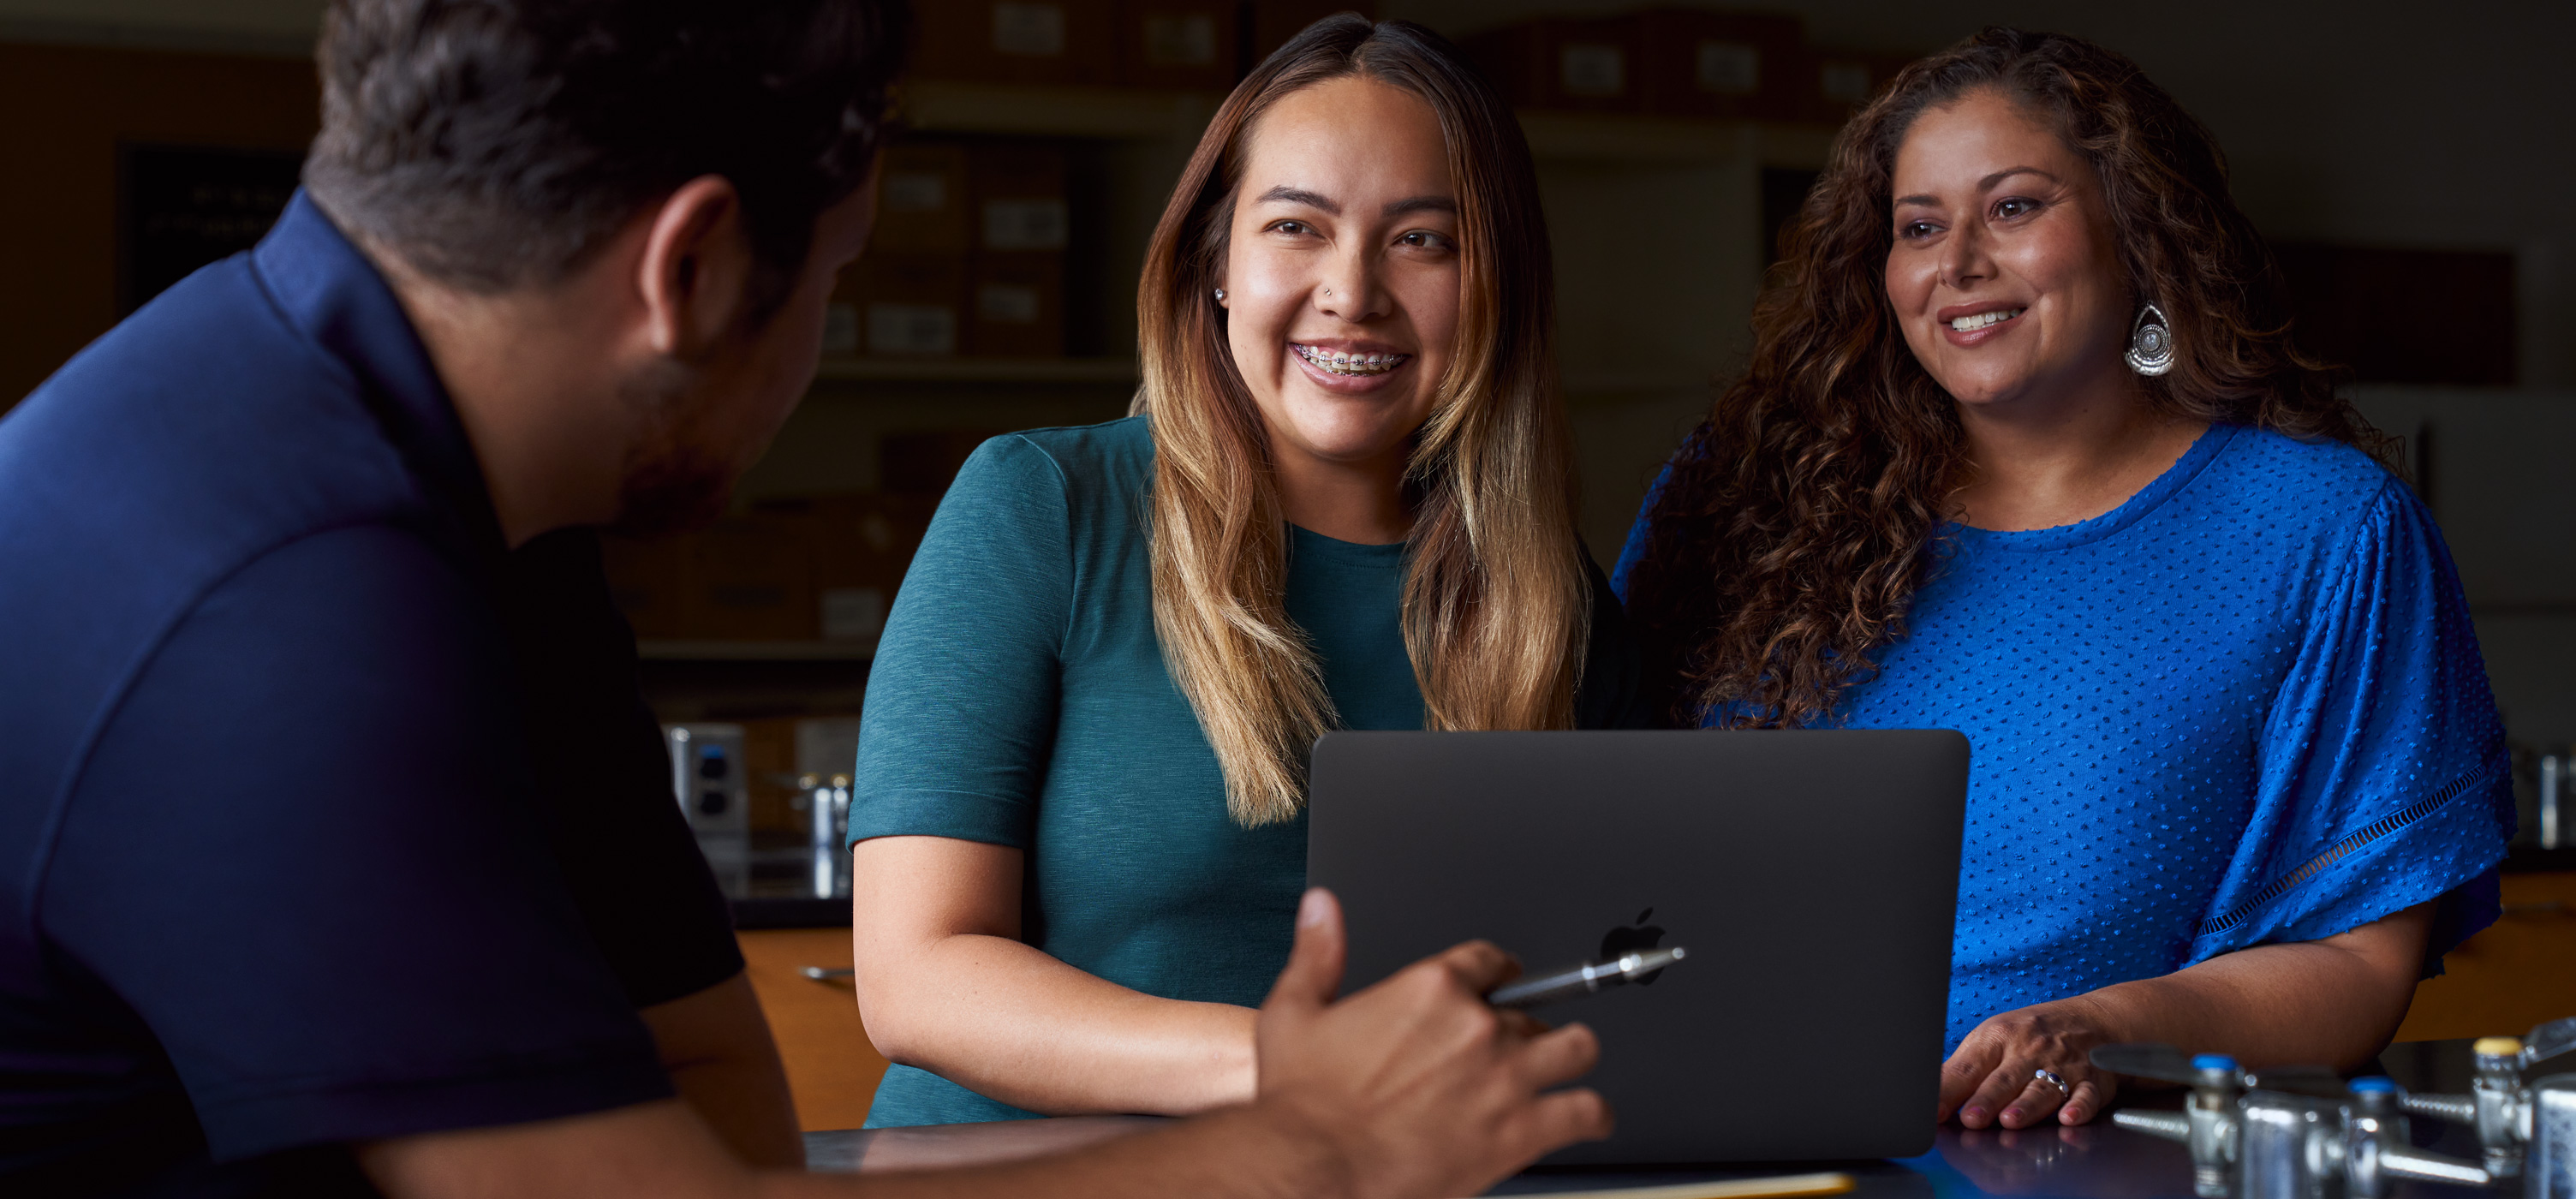 The College Board Supports Students with Free, Remote Learning